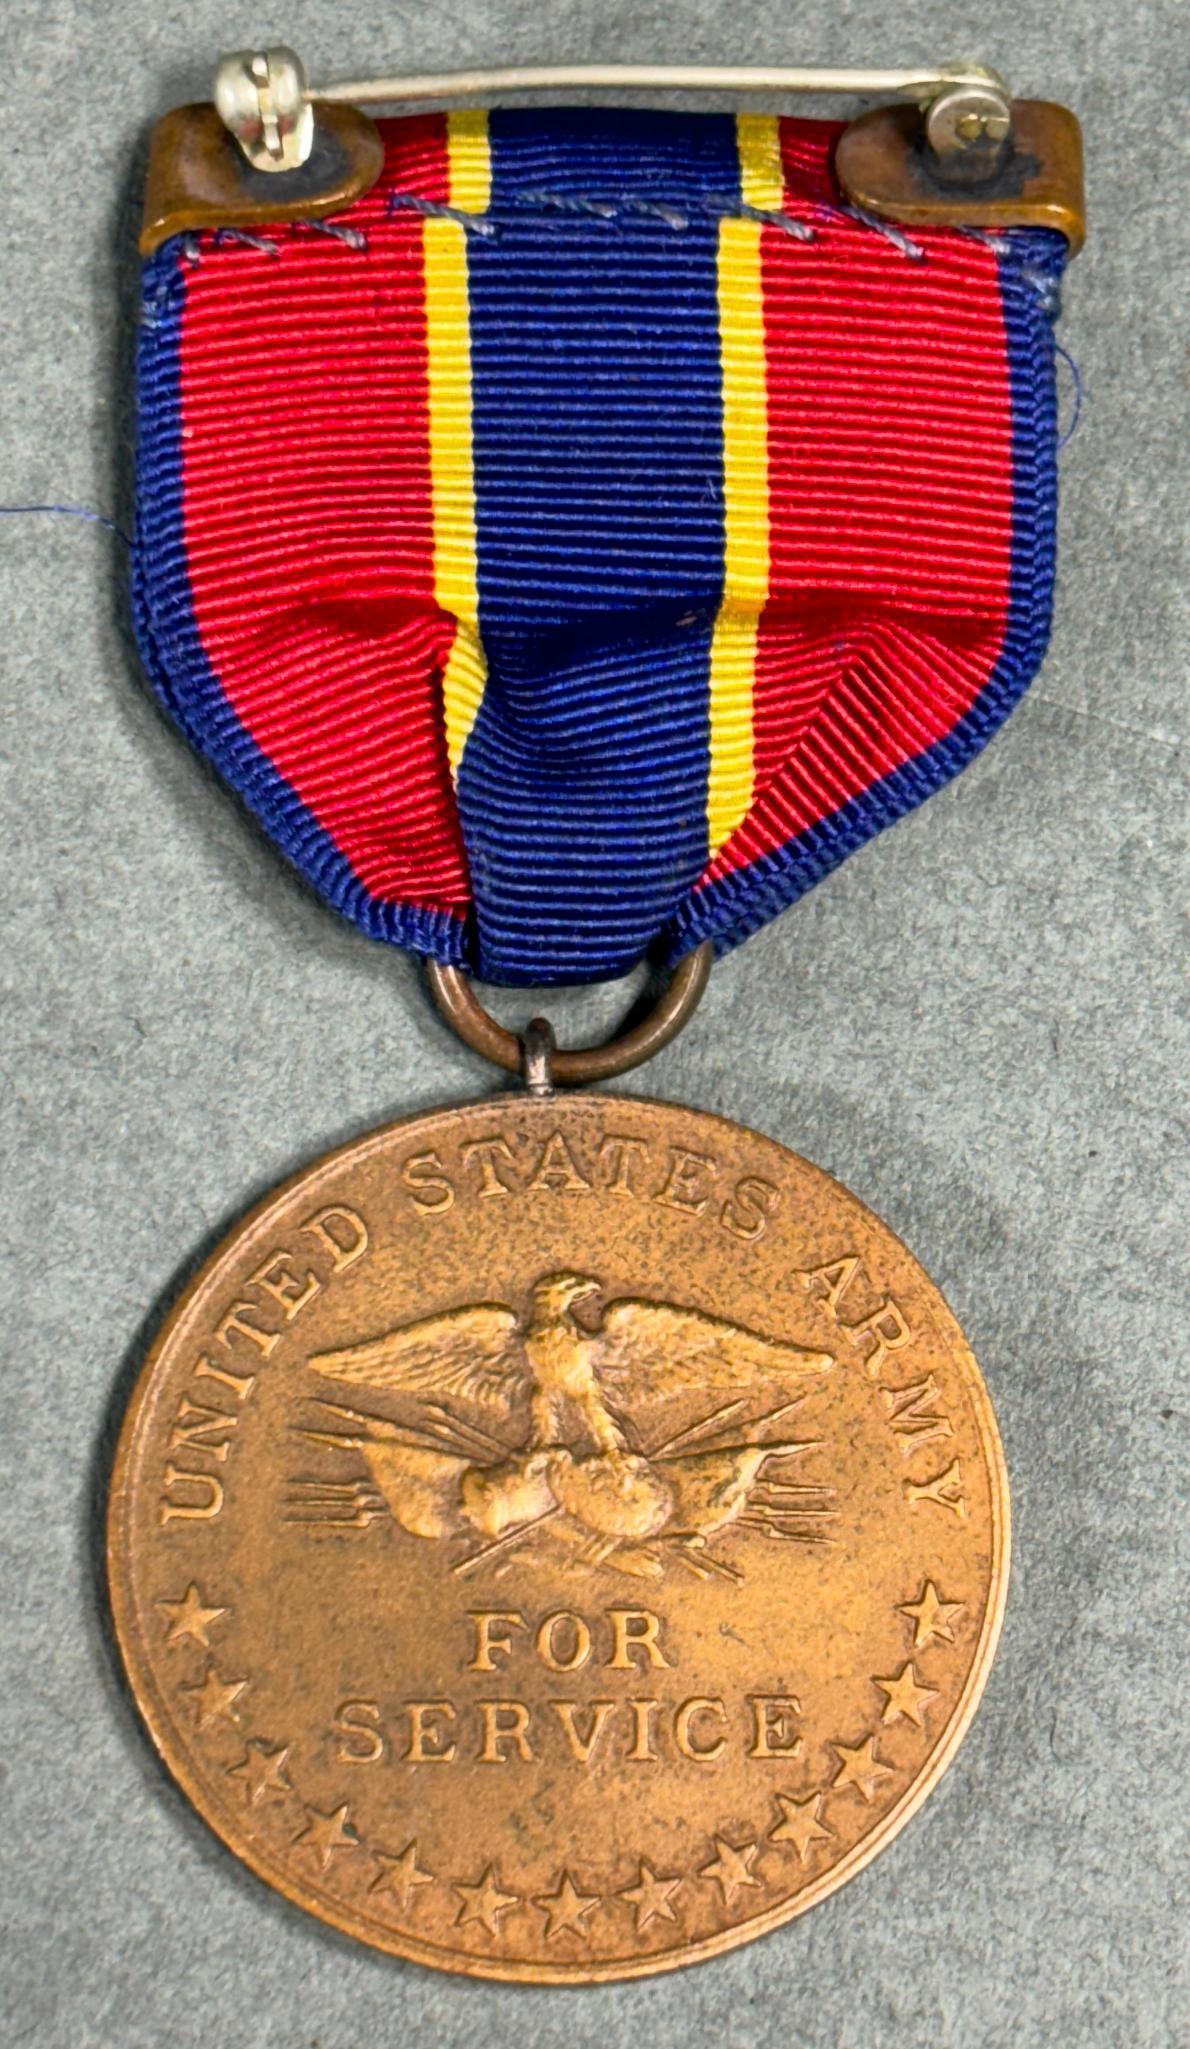 SPAN-AM WAR CUBA OCCUPATION NUMBERED MEDAL